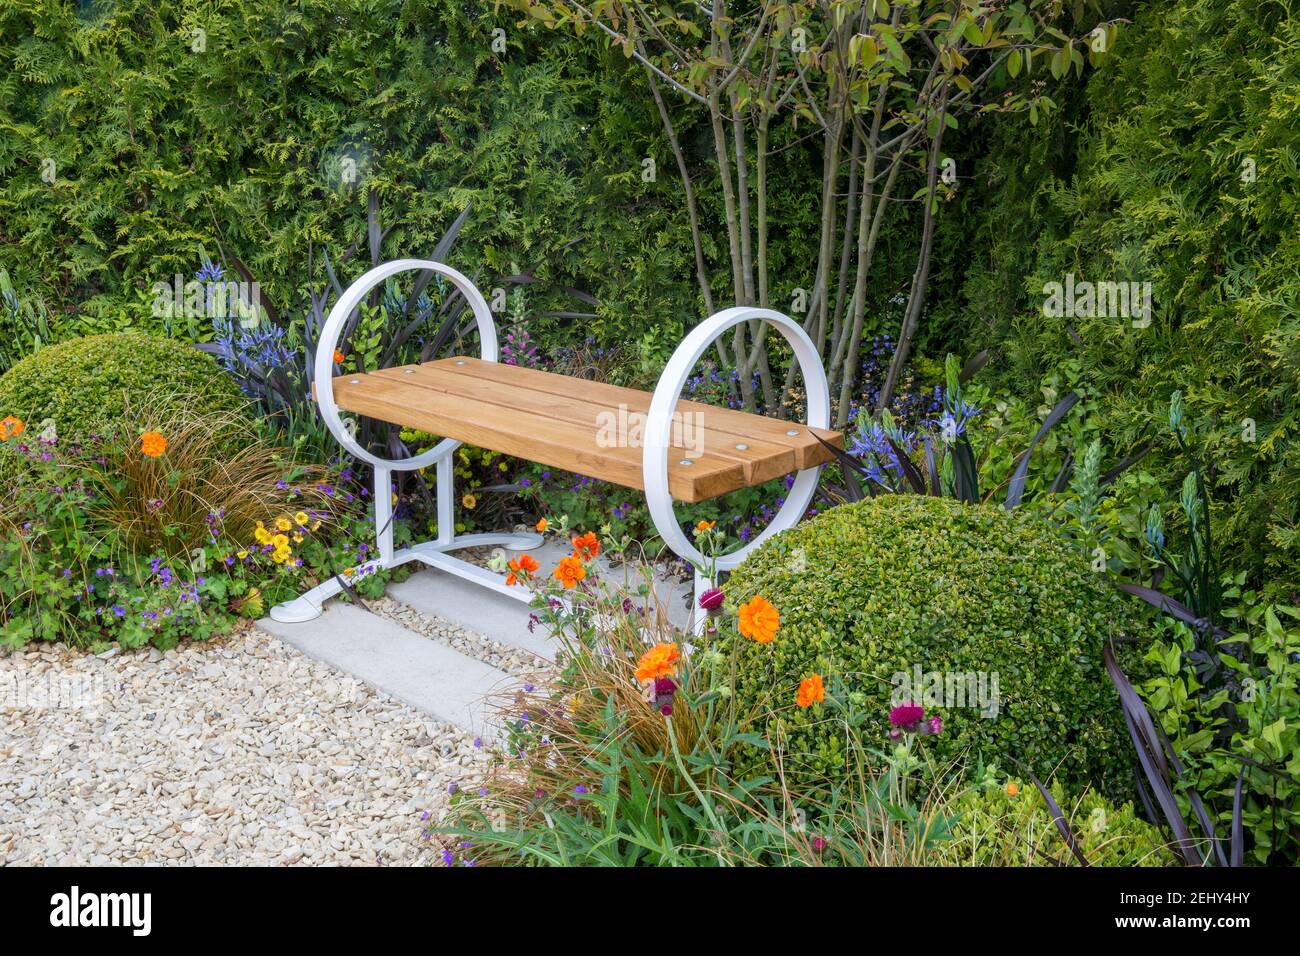 Contemporary wooden garden bench with a gravel path next to a border with box balls - Buxus sempervirens topiary England GB UK Spring Stock Photo